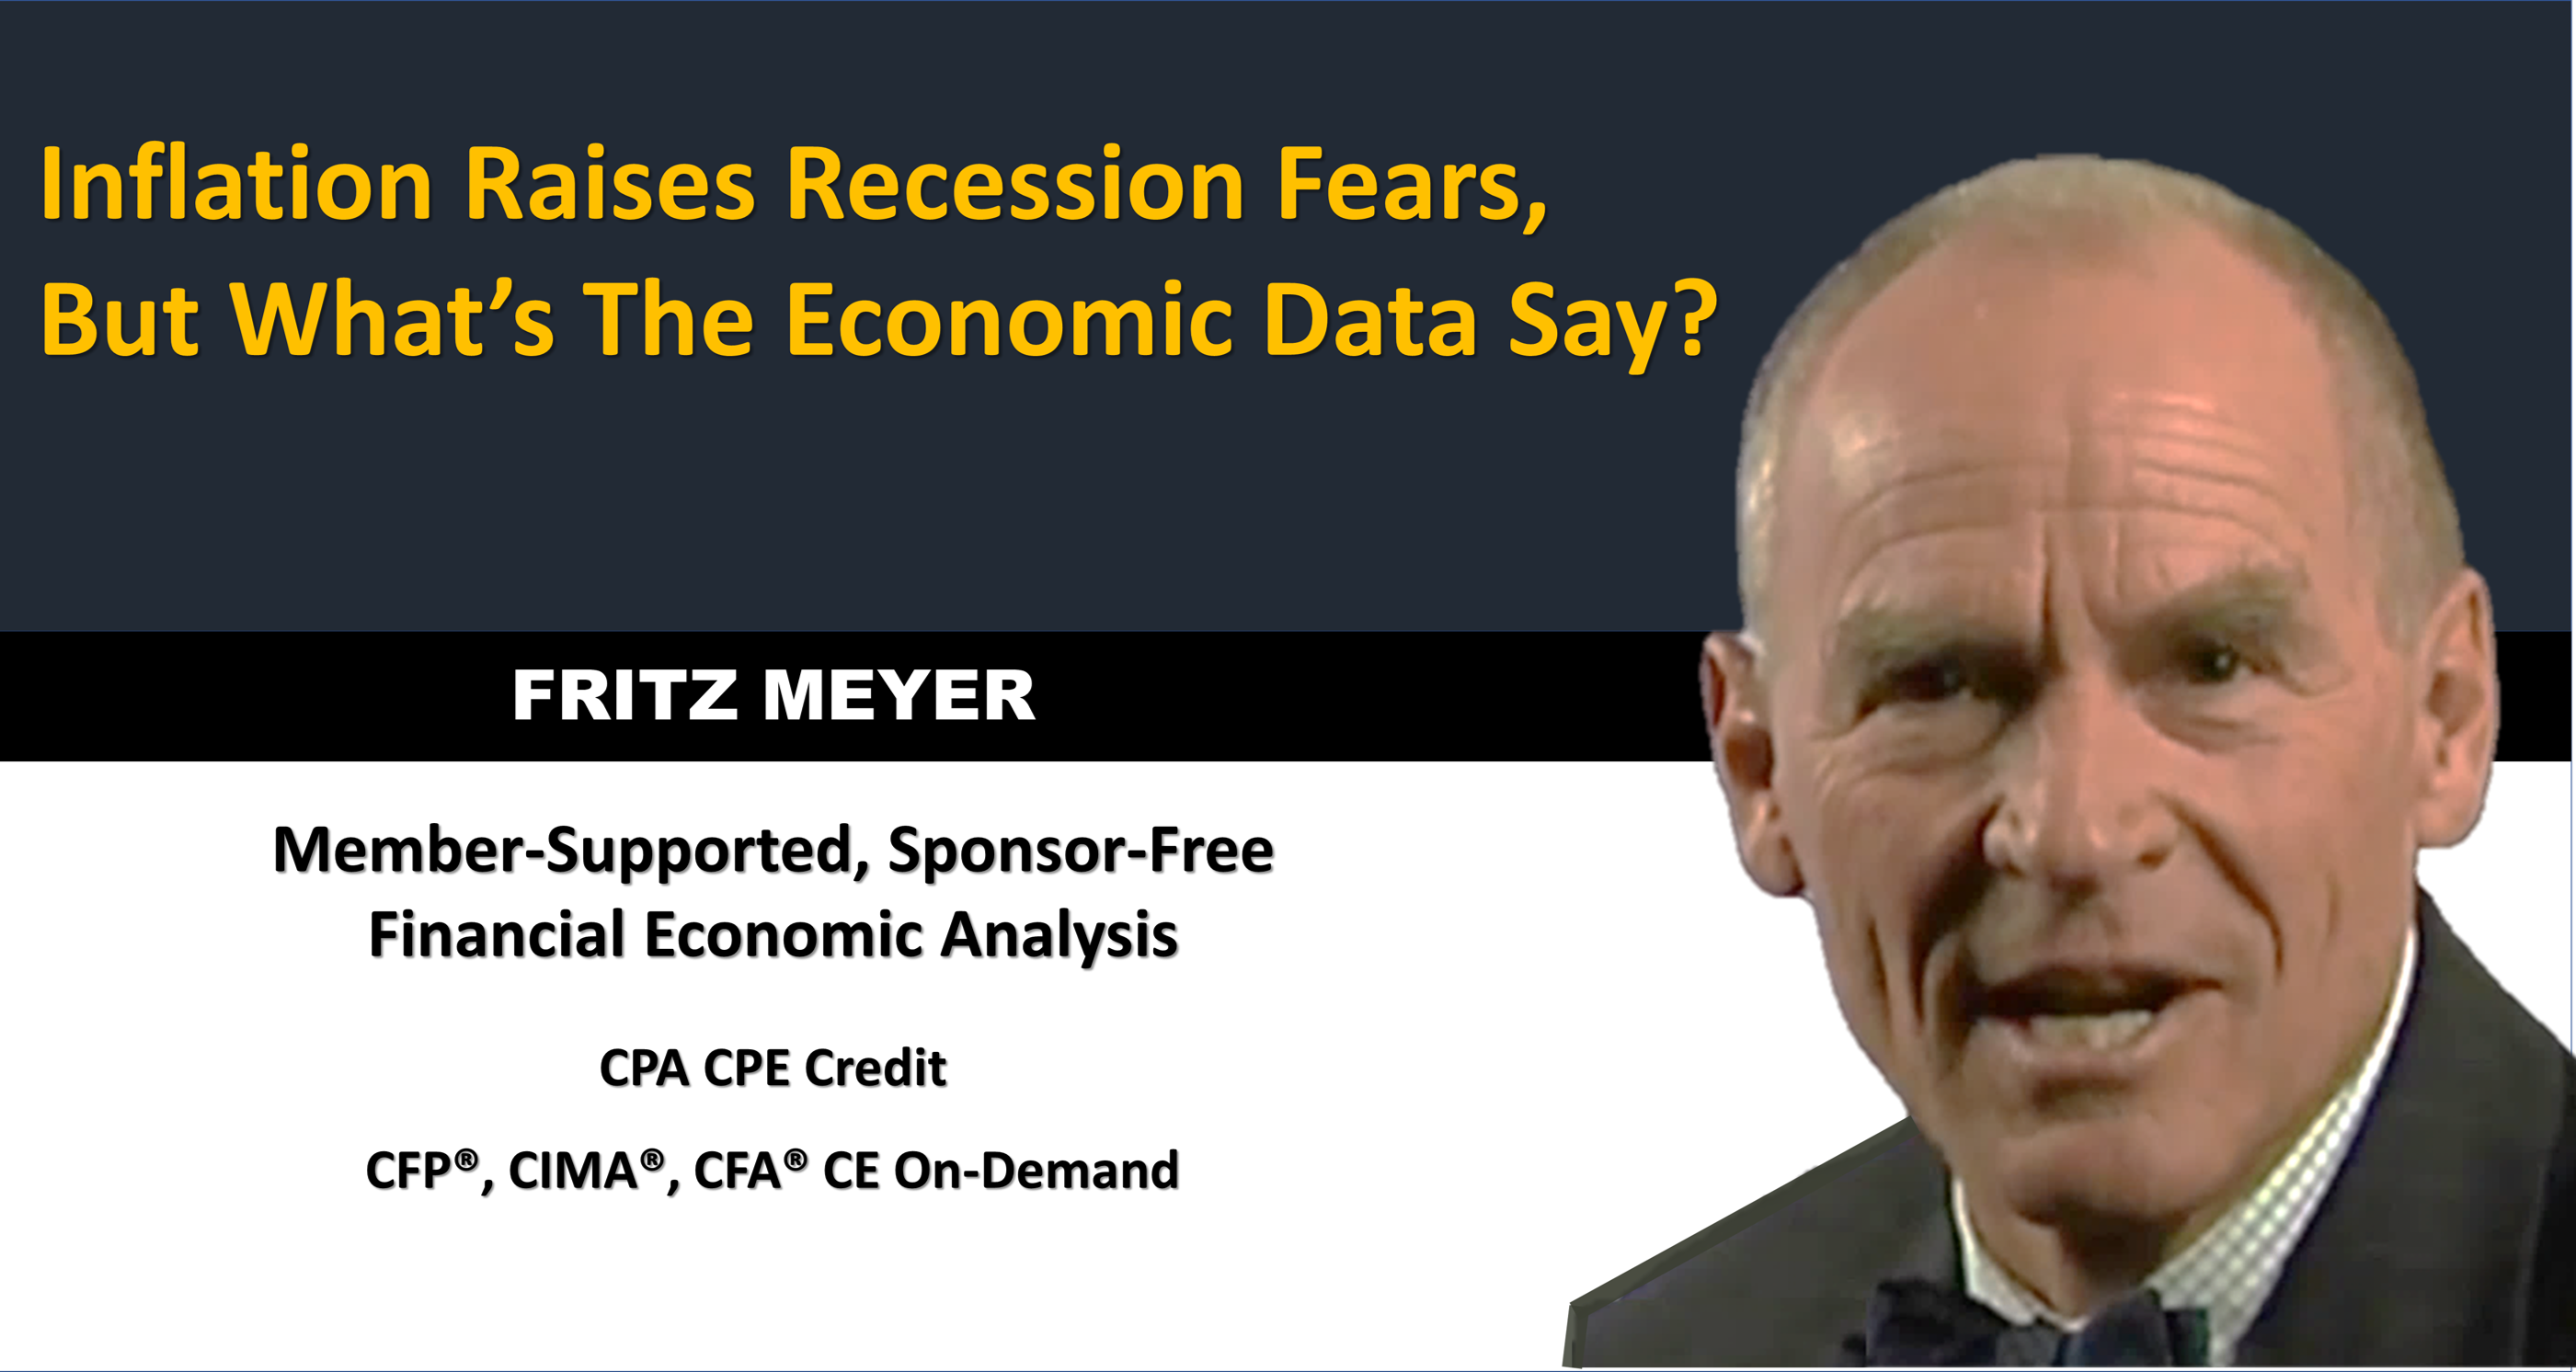 As Inflation Raises Recession Fears, Fritz Meyer Reviews May 2022 Financial Economic Conditions 